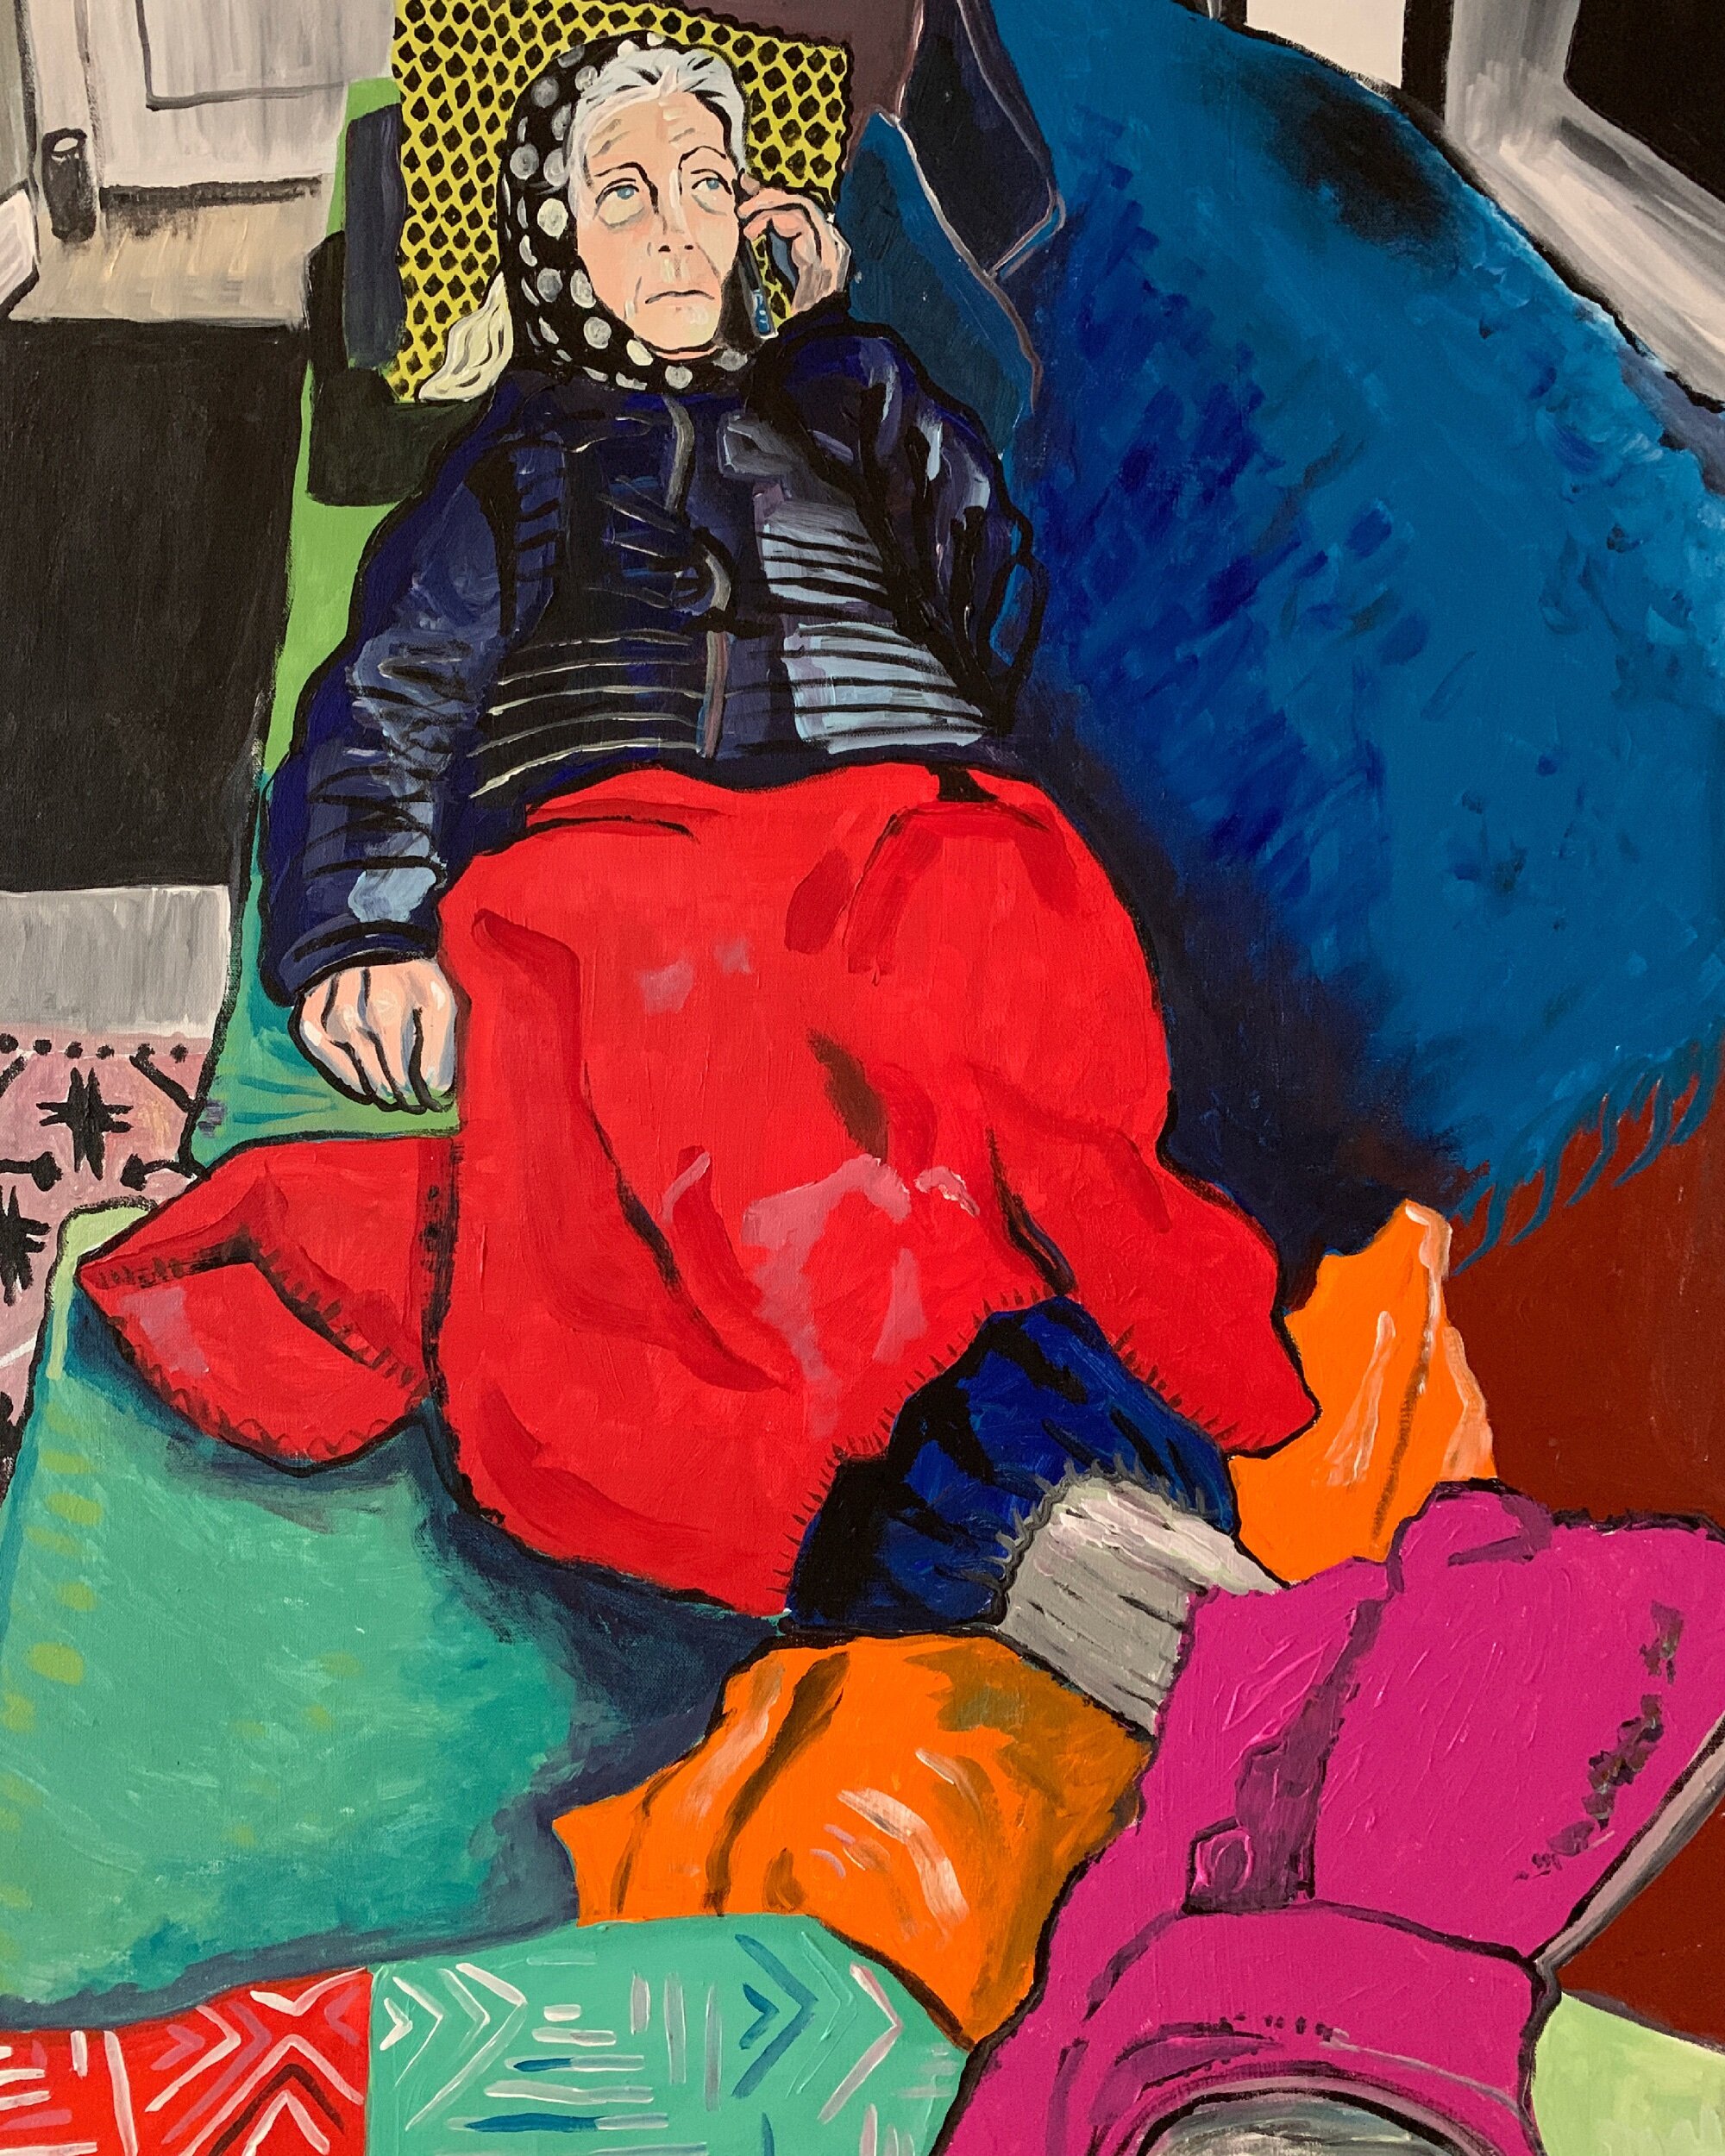 Oma on the Phone 30”x40” oil and acrylic on canvas, 2021